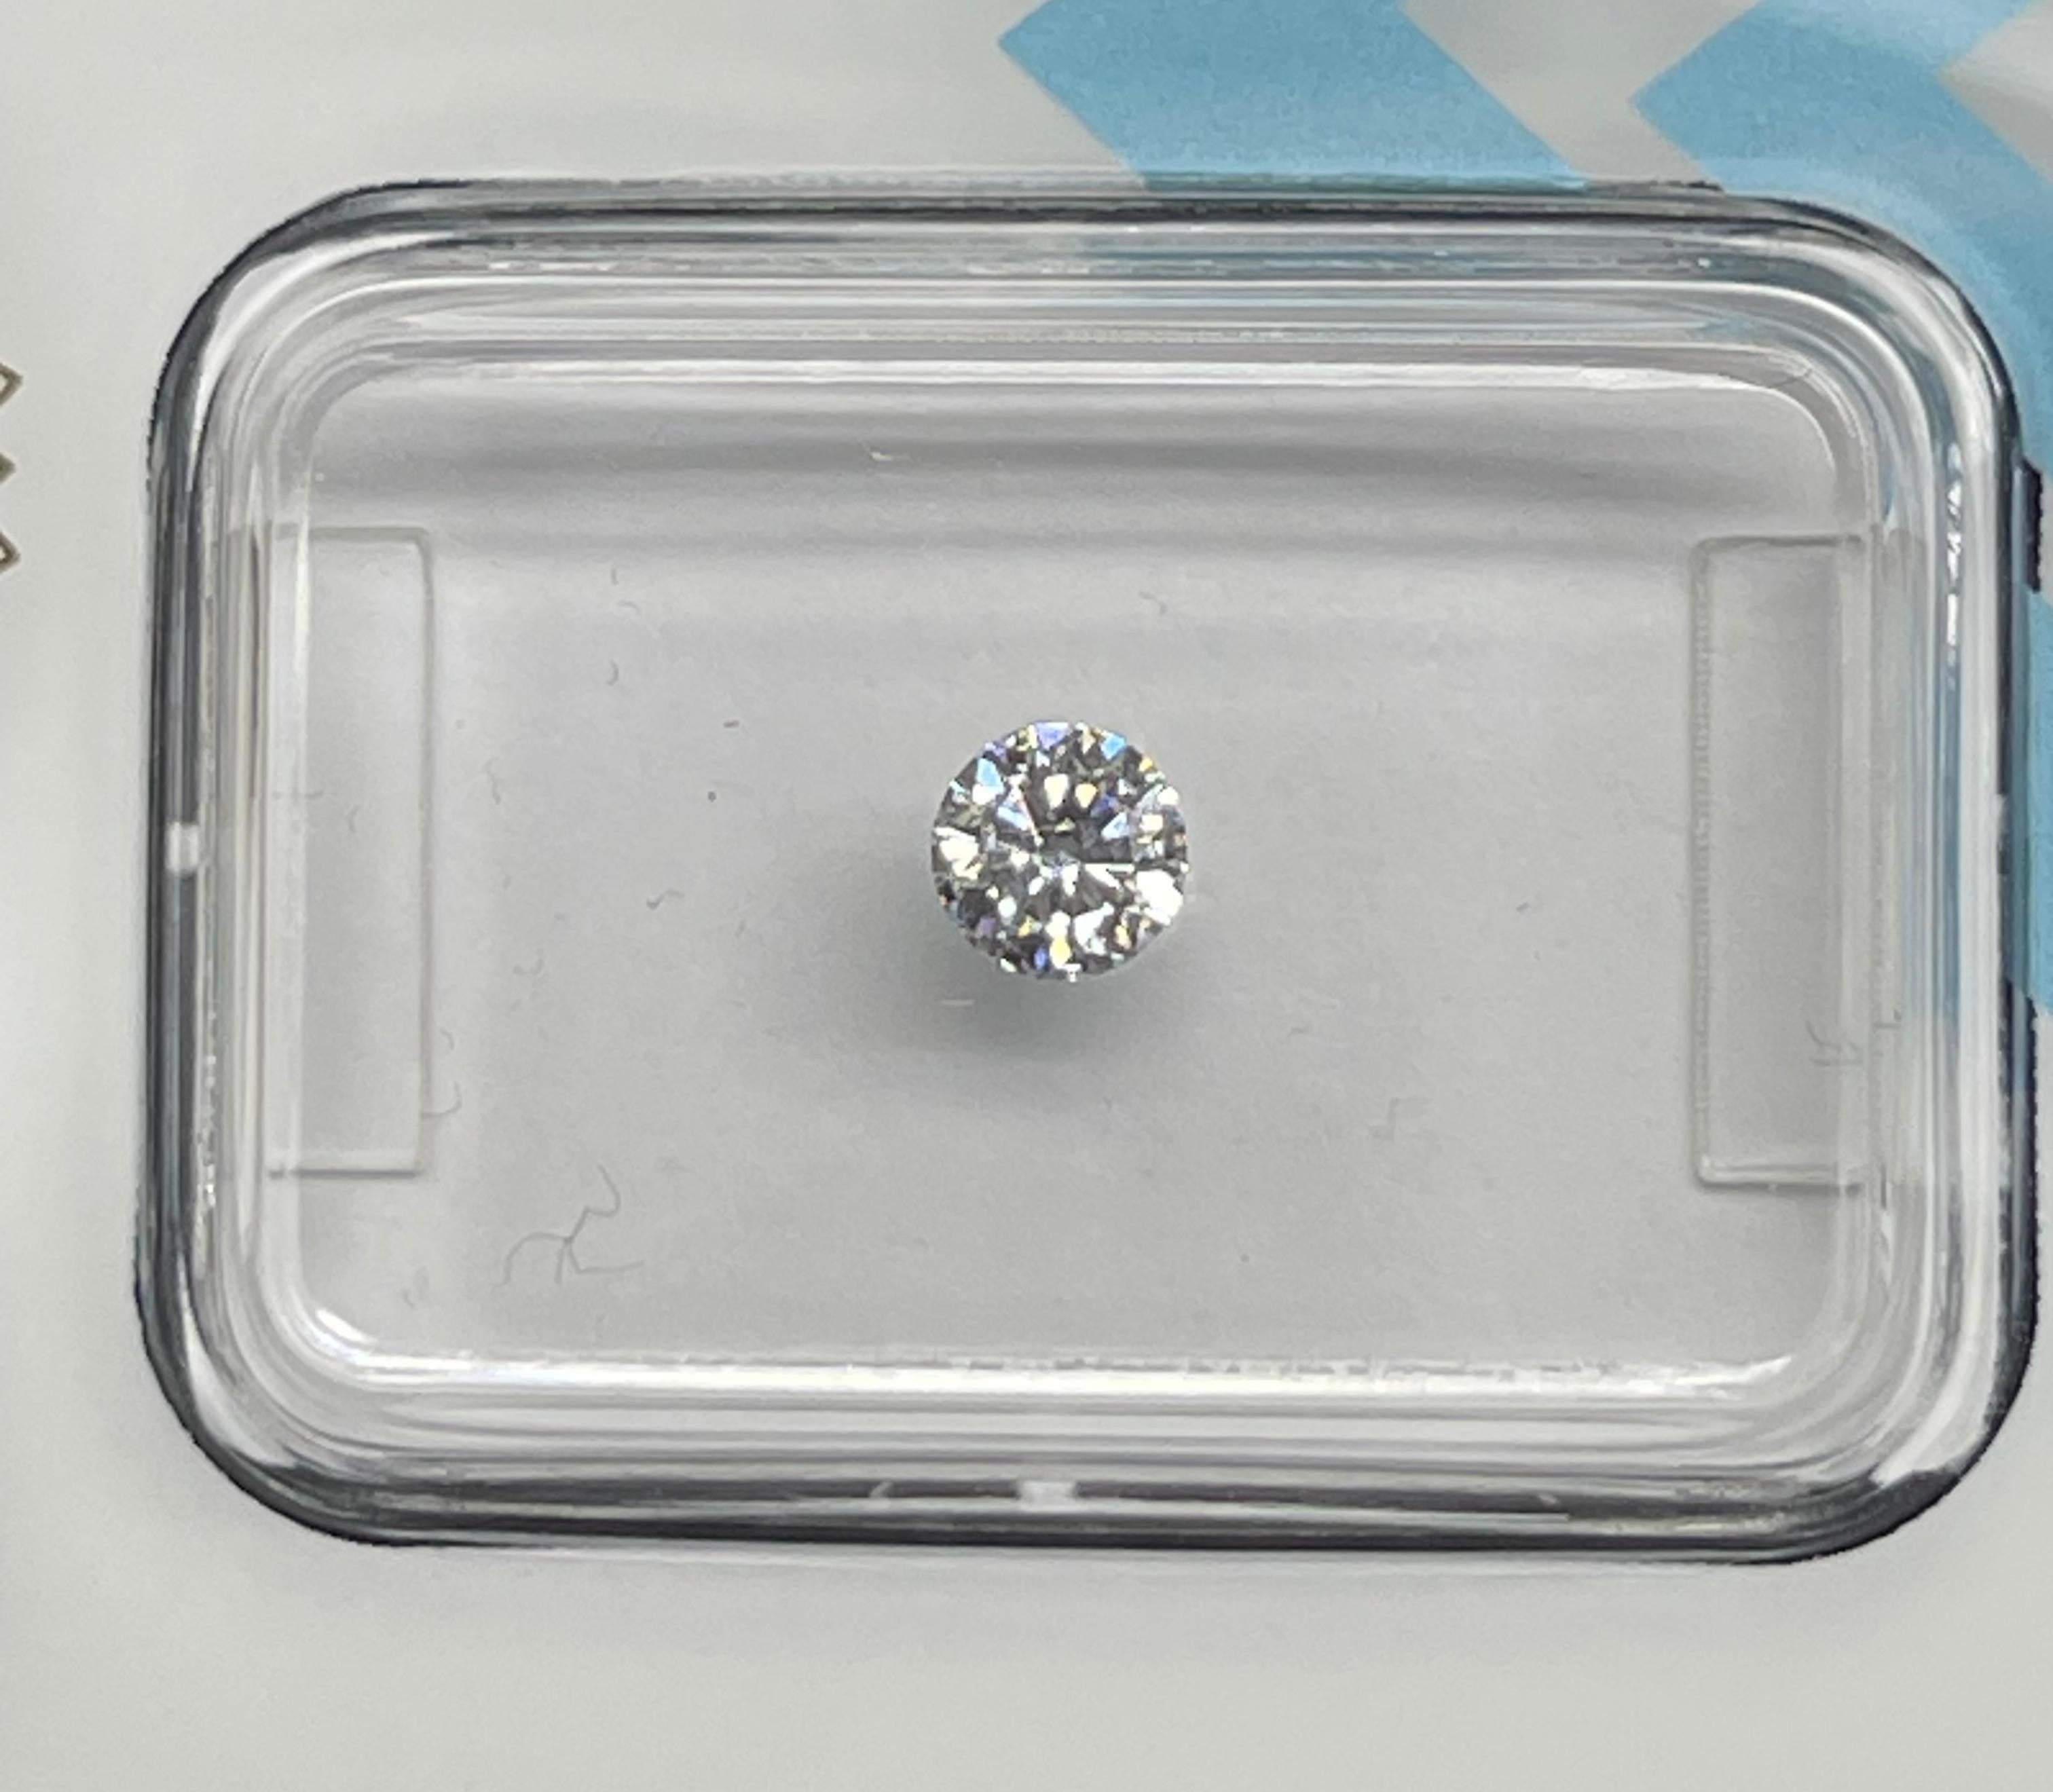 Natural Diamond graded by IGI.

Shape: Round Brilliant
Weight: 0.24 CT
Color: D
Clarity: VS2
Cut: Very Good
Polish: Very Good
Symmetry: Excellent
Fluorescence: None
Laser inscription : IGI 630434204